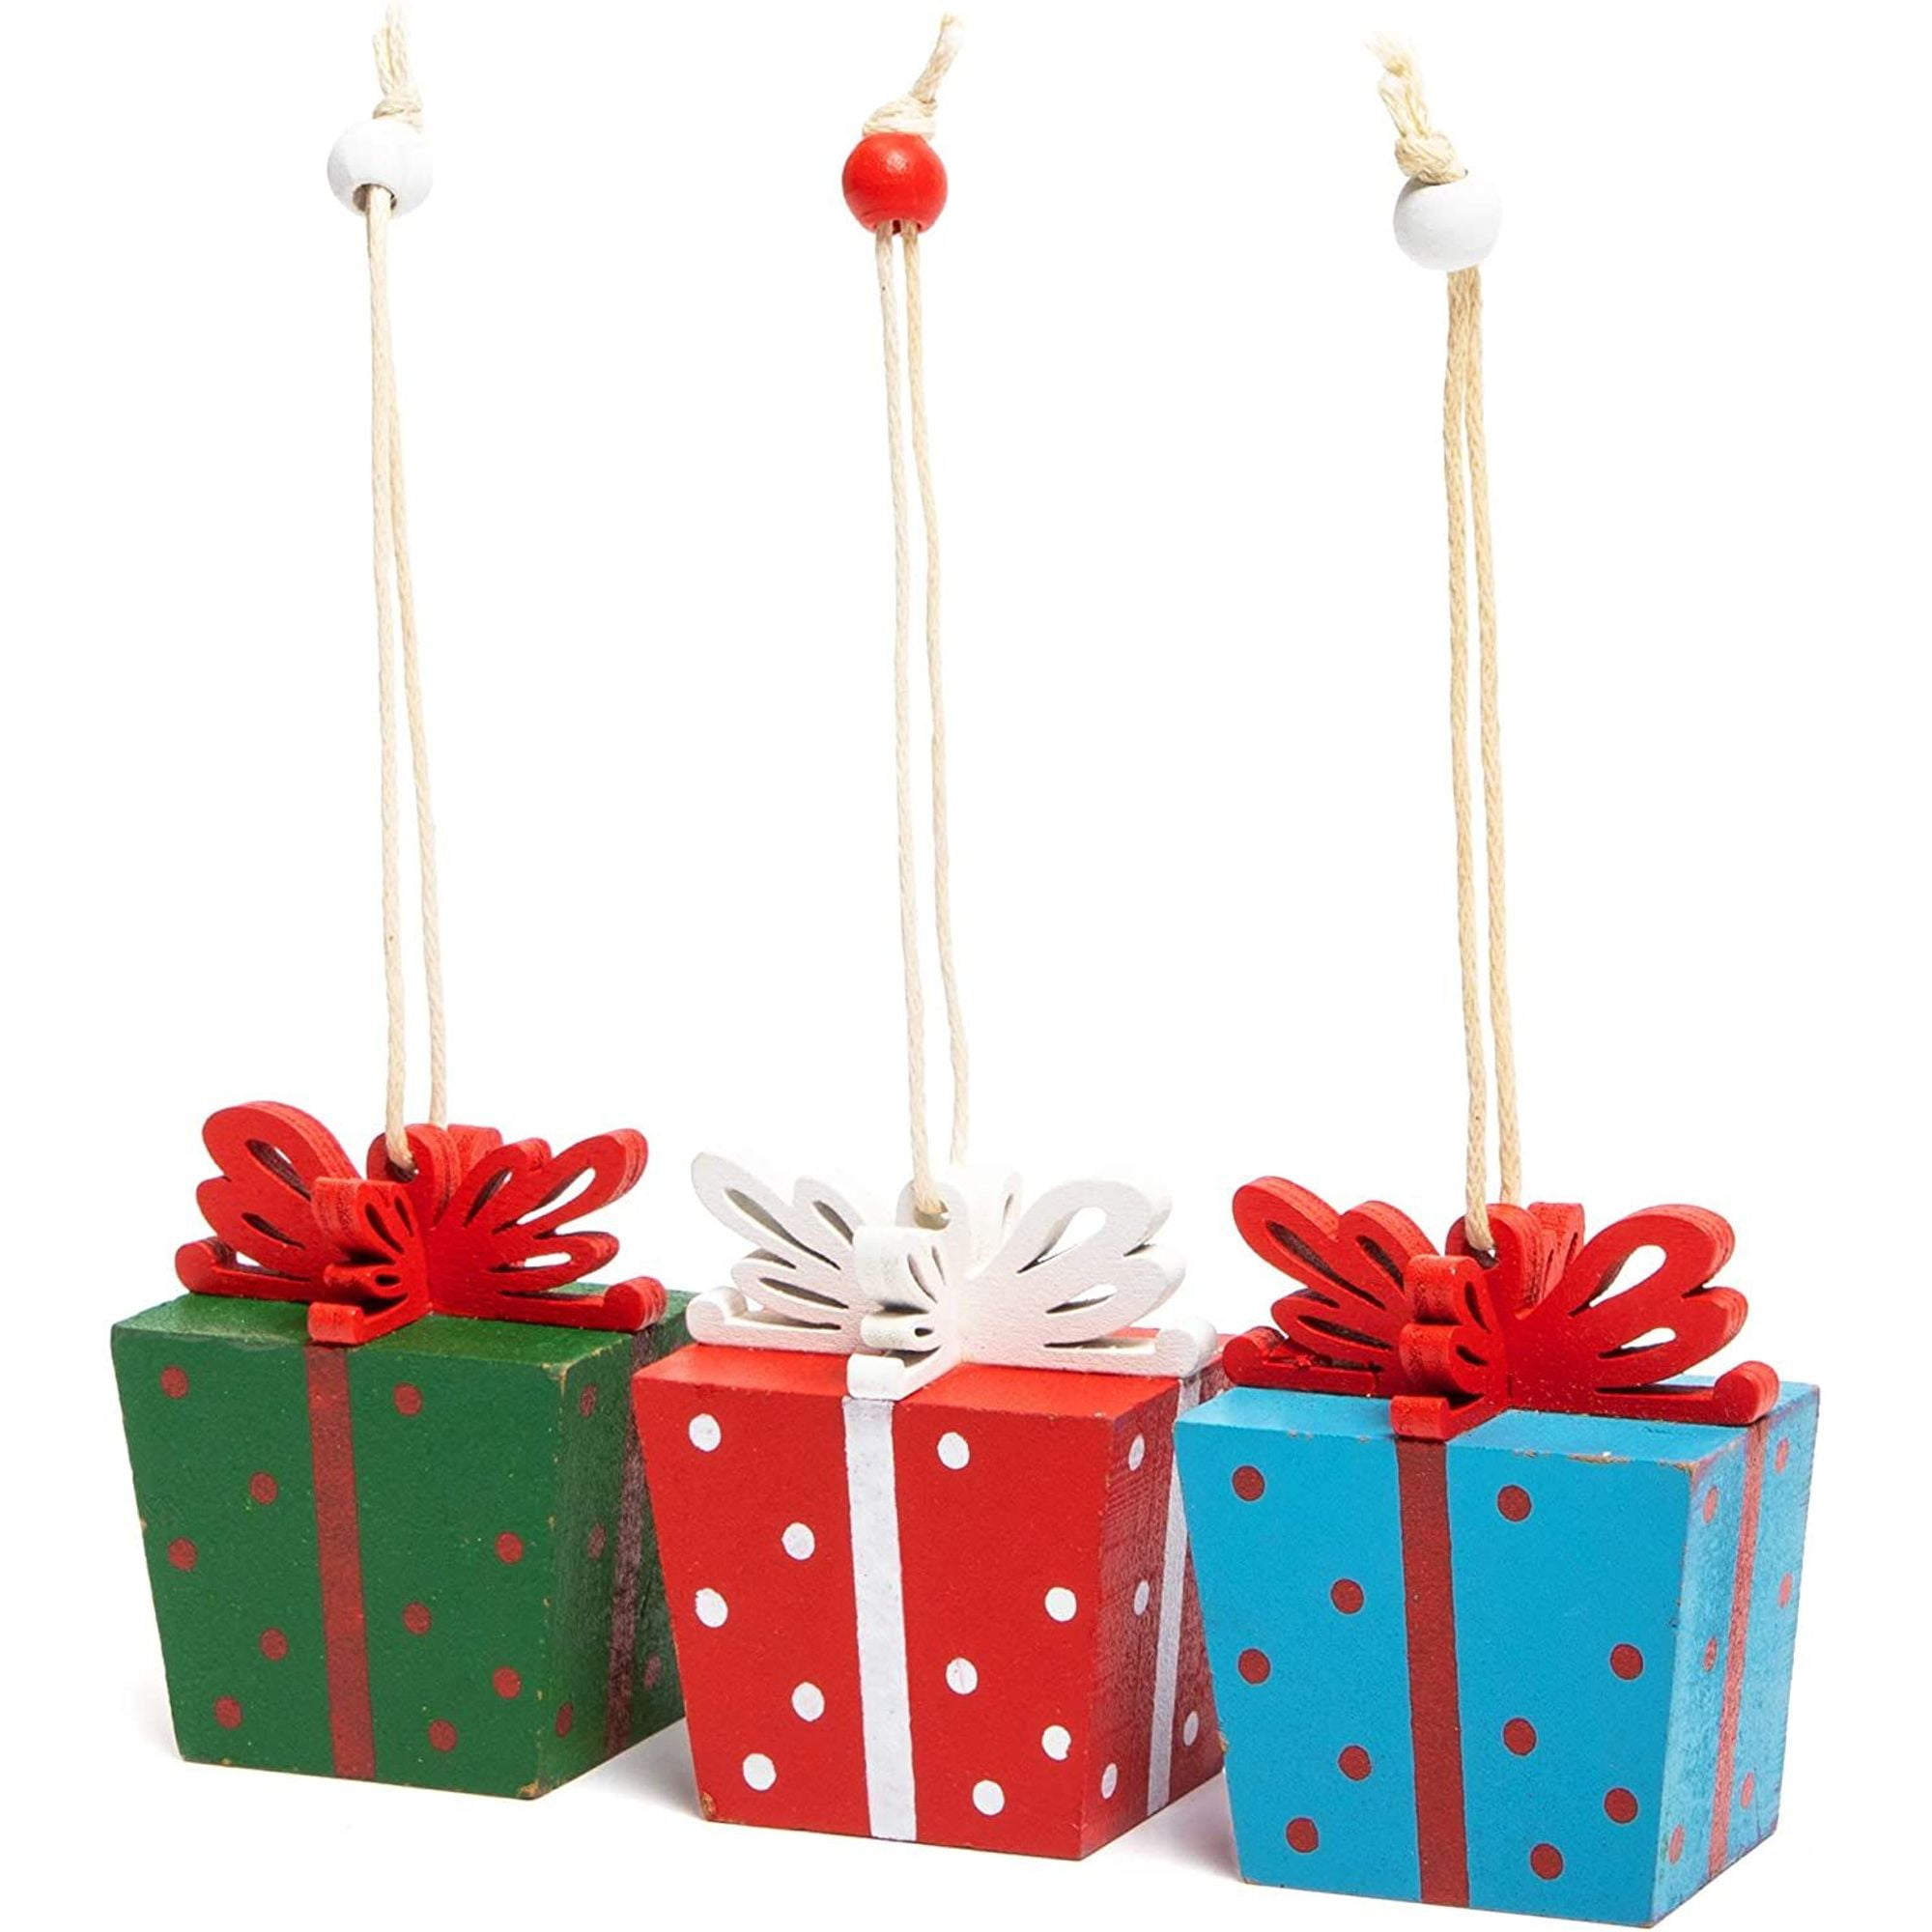 3-Pack Christmas Ornaments, 2.4" Wooden Gift Box Hanging Ornament Set